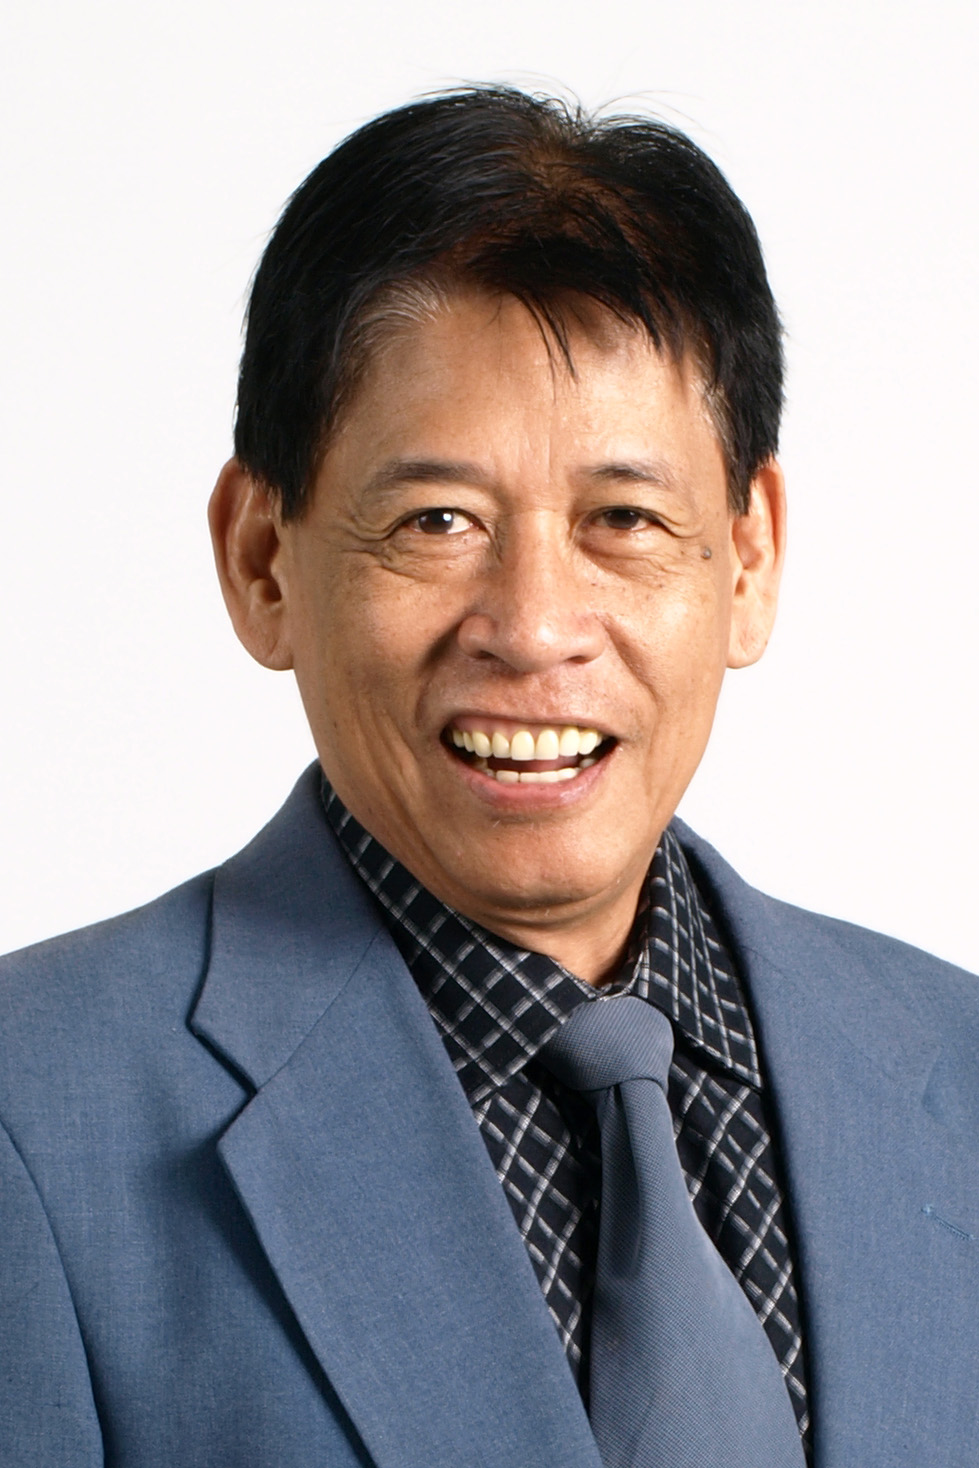 Dr. Ariniego Donates Additional P10 Million for Scholarships in Medicine